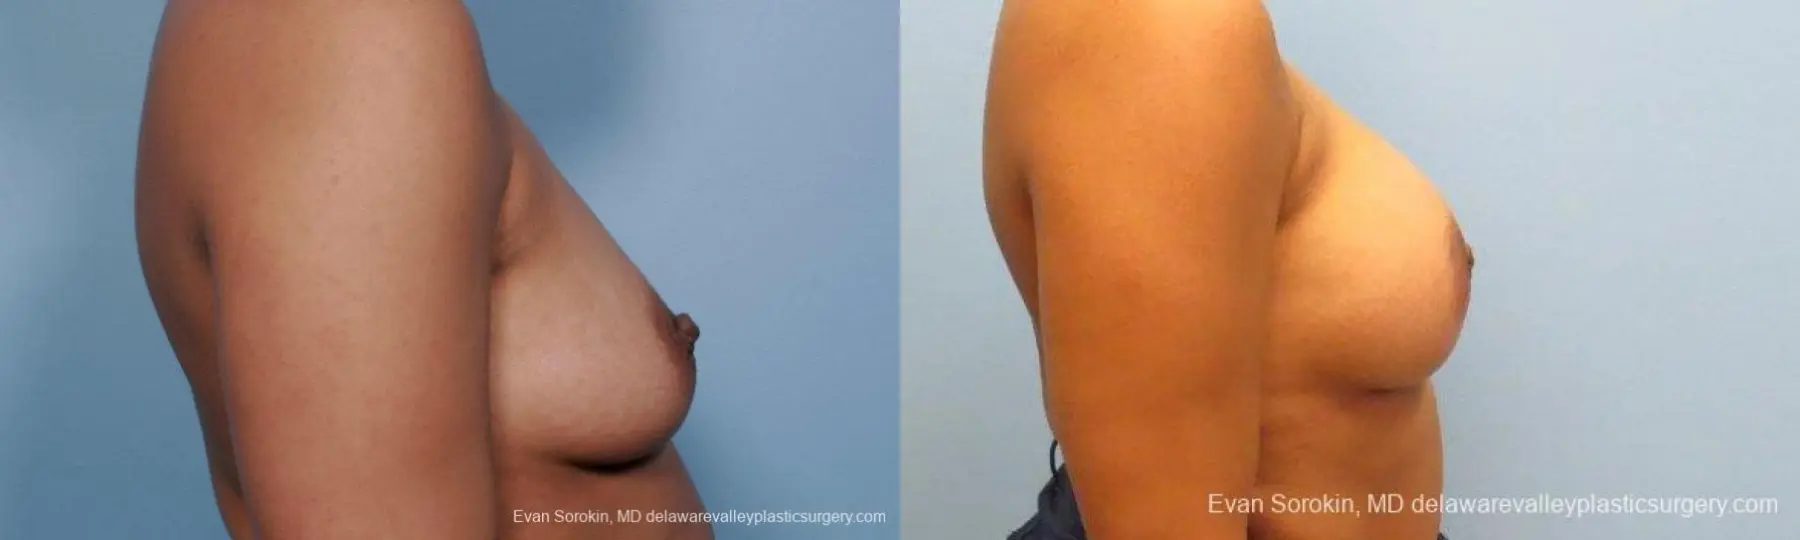 Philadelphia Breast Augmentation 9387 - Before and After 3